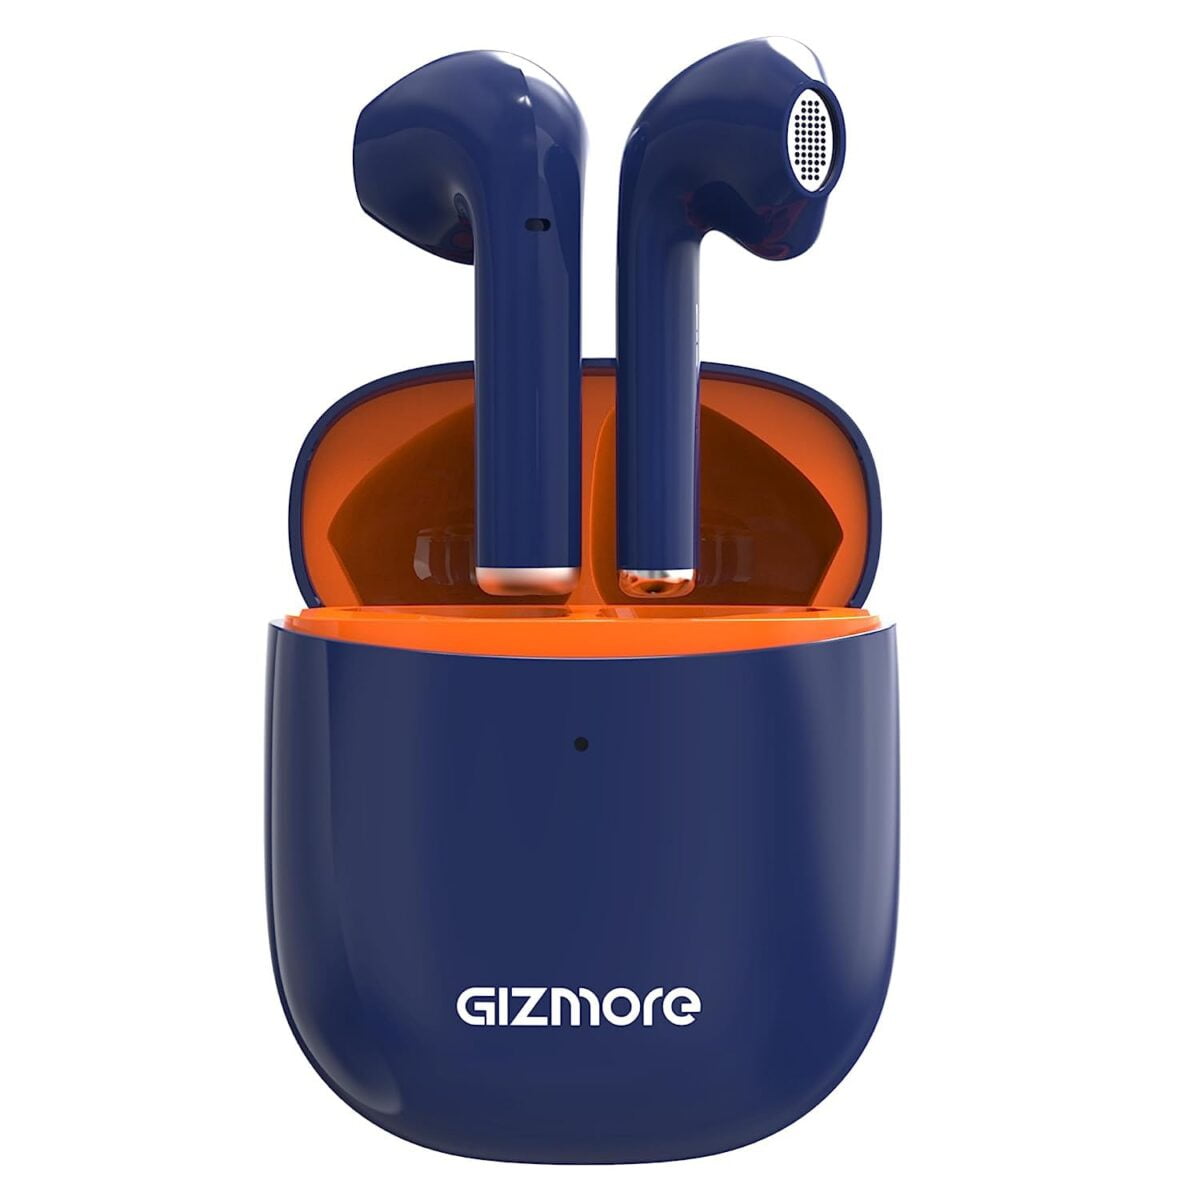 Gizmore tws 801 air earbuds blue